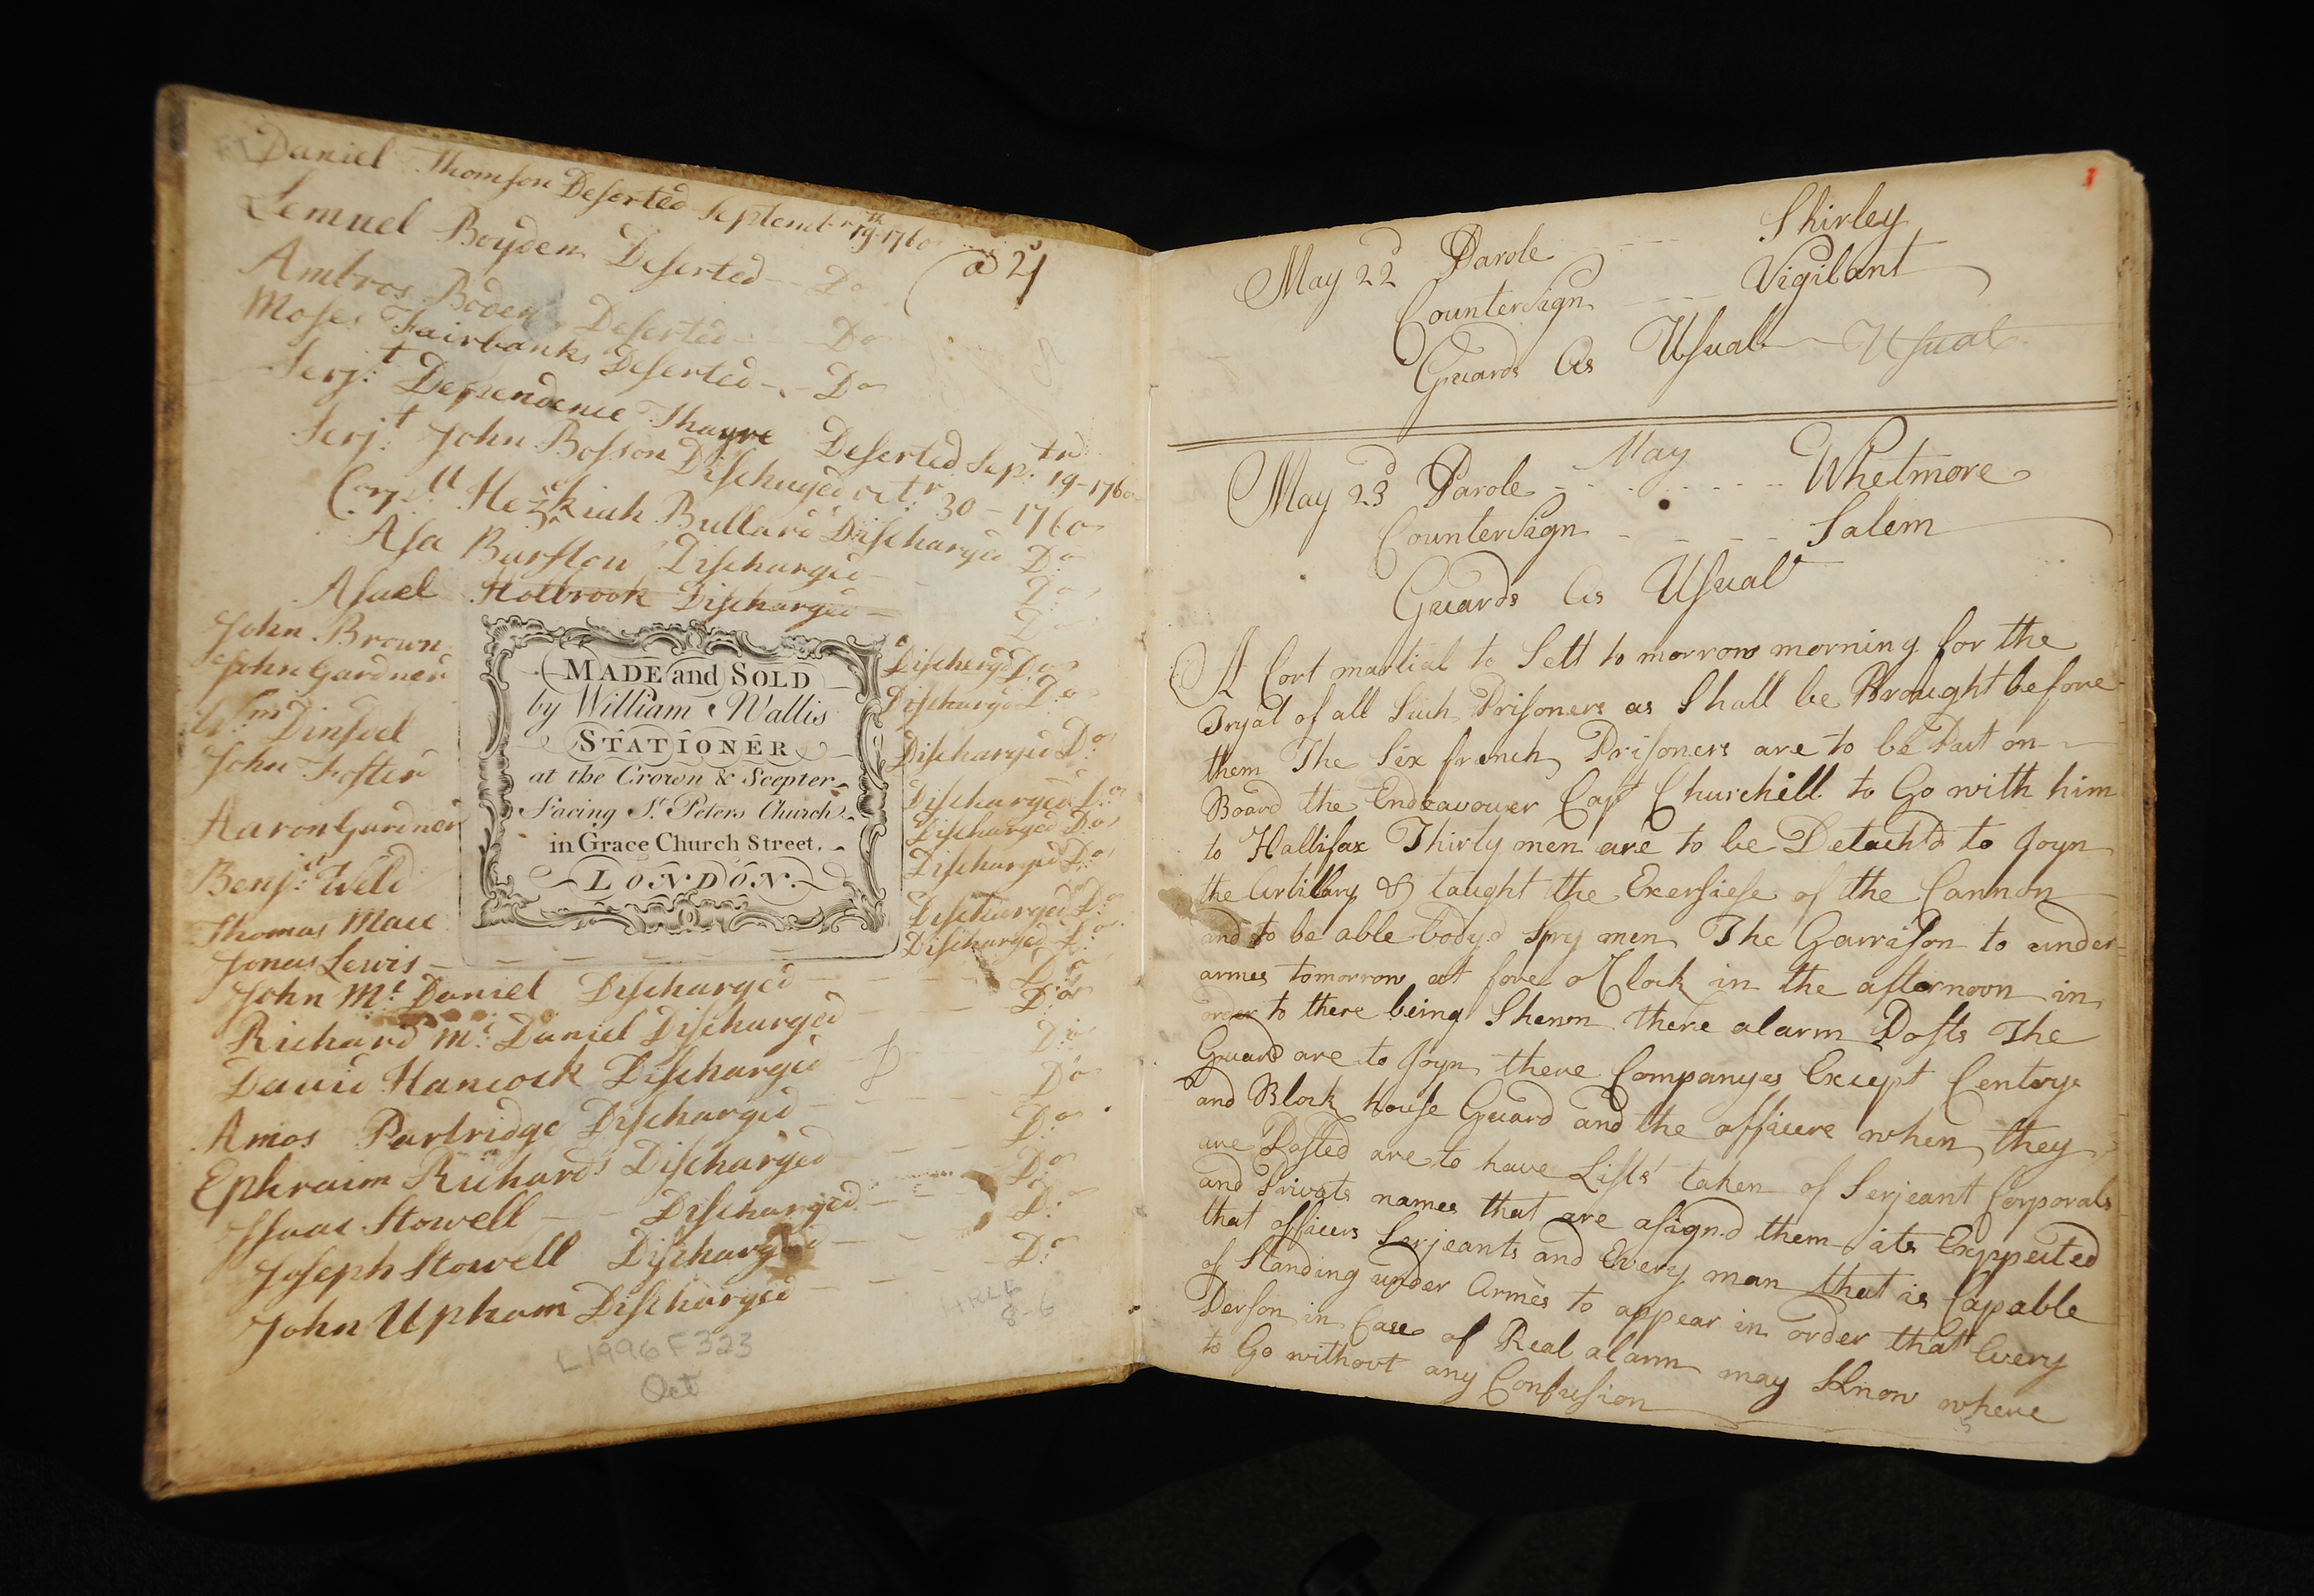 Orderly book of Captain Simon Slocumb’s Company of the Massachusetts Regiment of Foot, Fort Cumberland, Nova Scotia, May 10, 1759-September 6, 1760